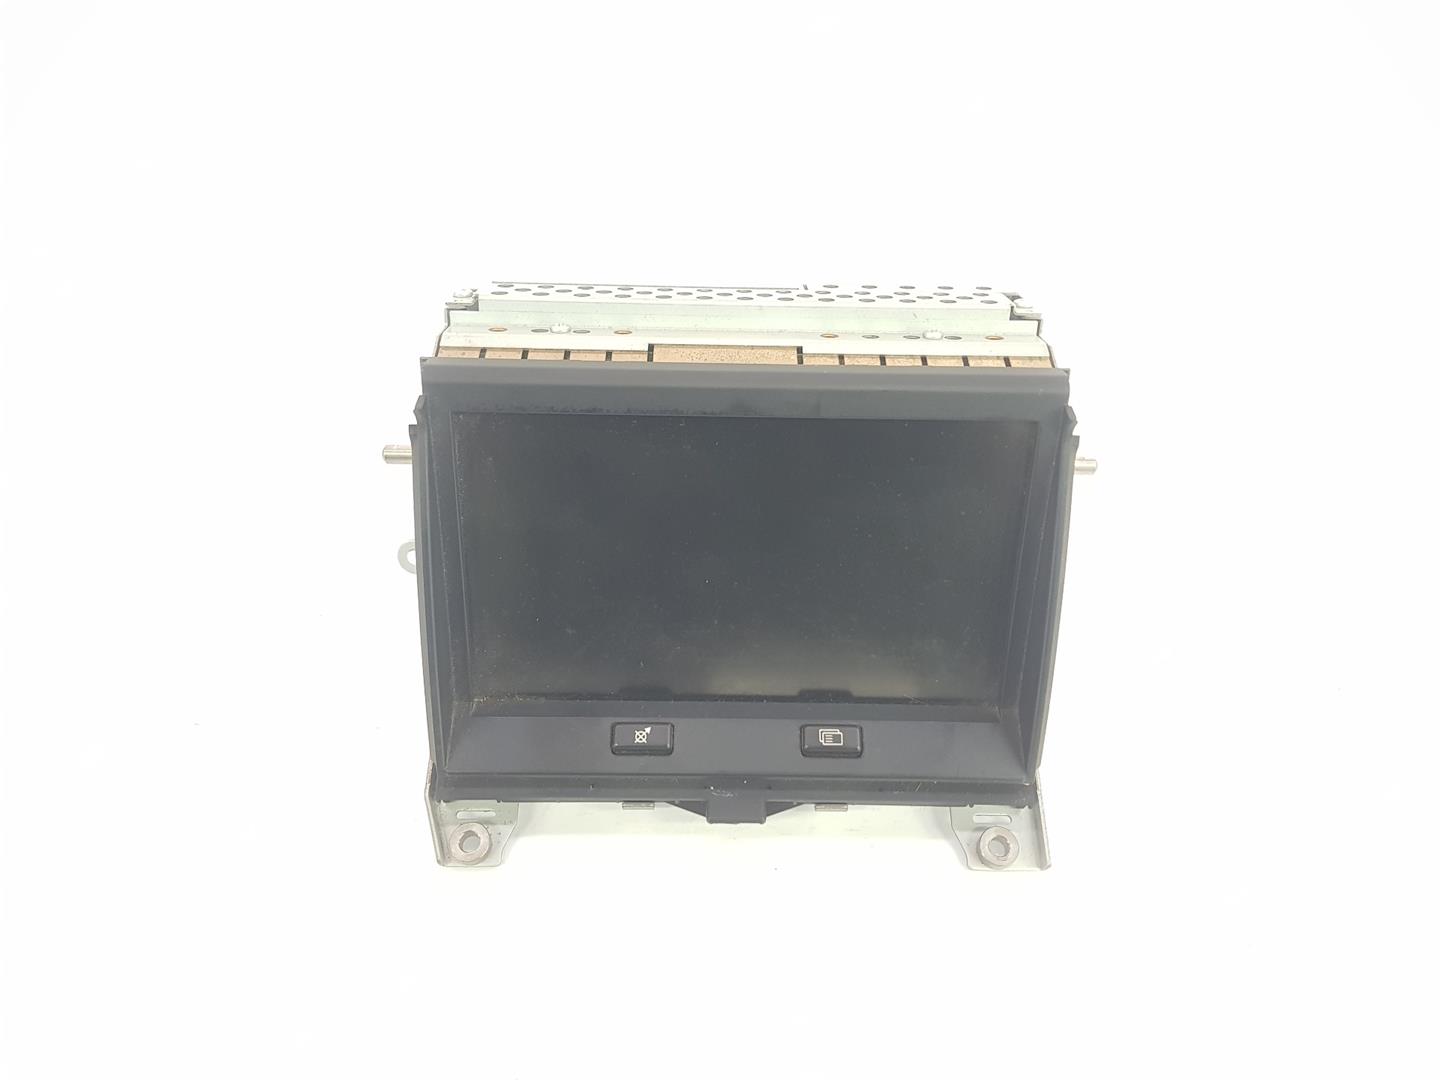 LAND ROVER Range Rover Sport 1 generation (2005-2013) Other Interior Parts YIE500090, 7H2210E889AB 19809307